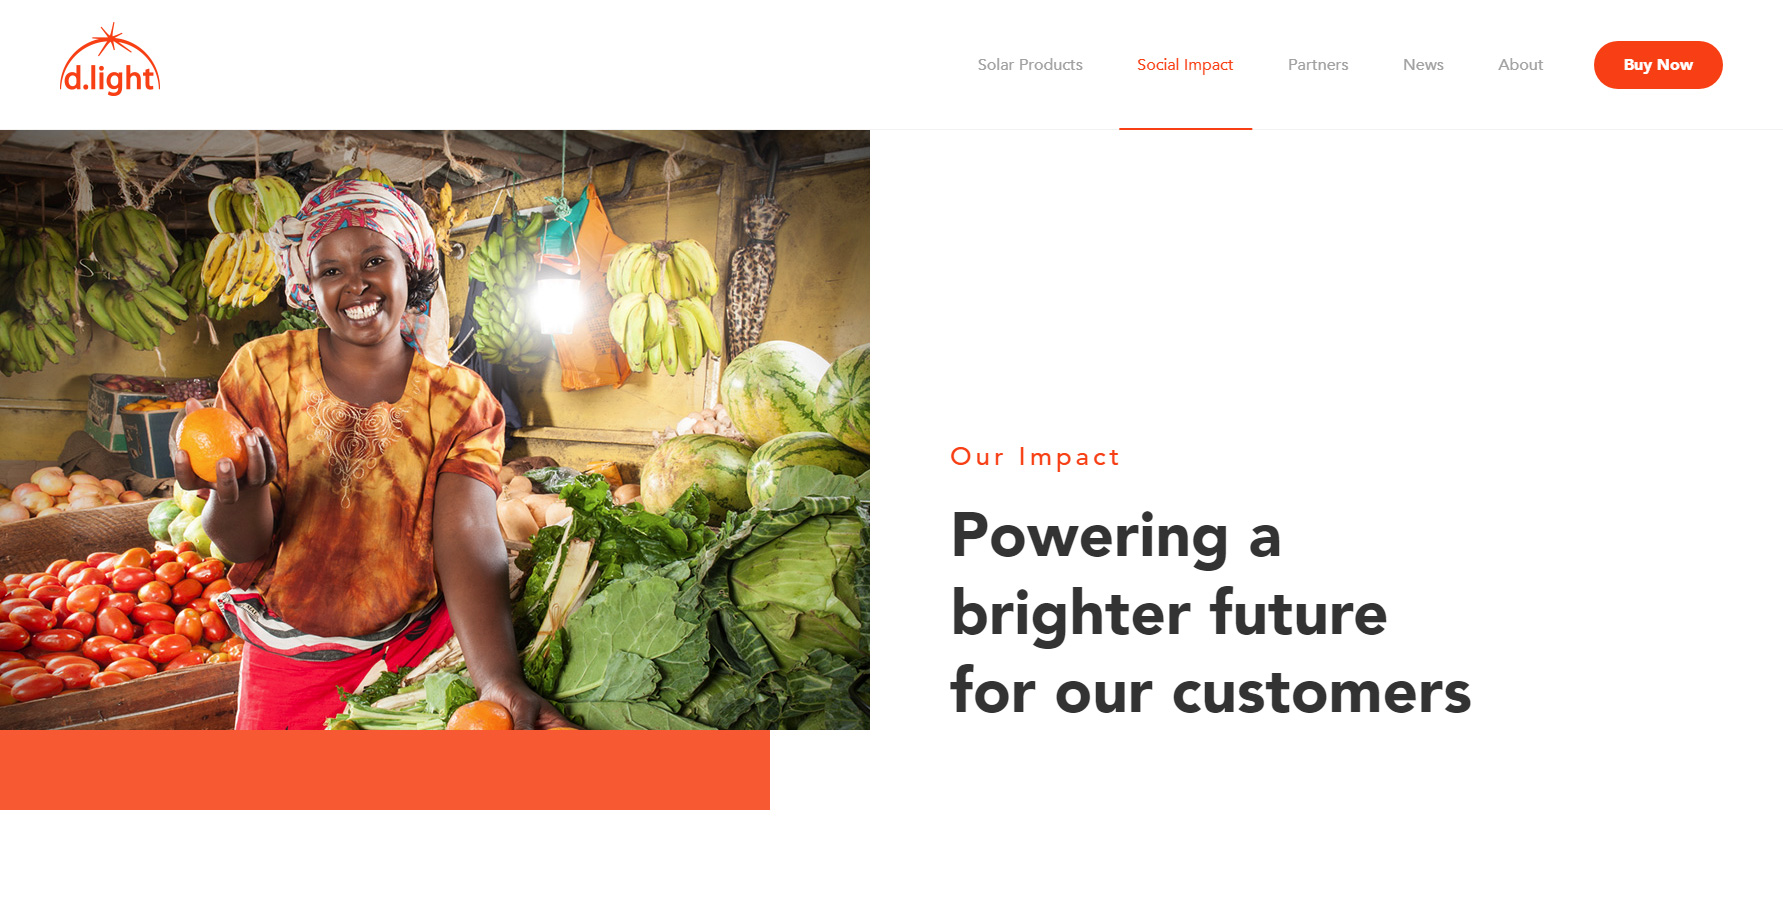 d.light: A Brighter Future - Website of the Day